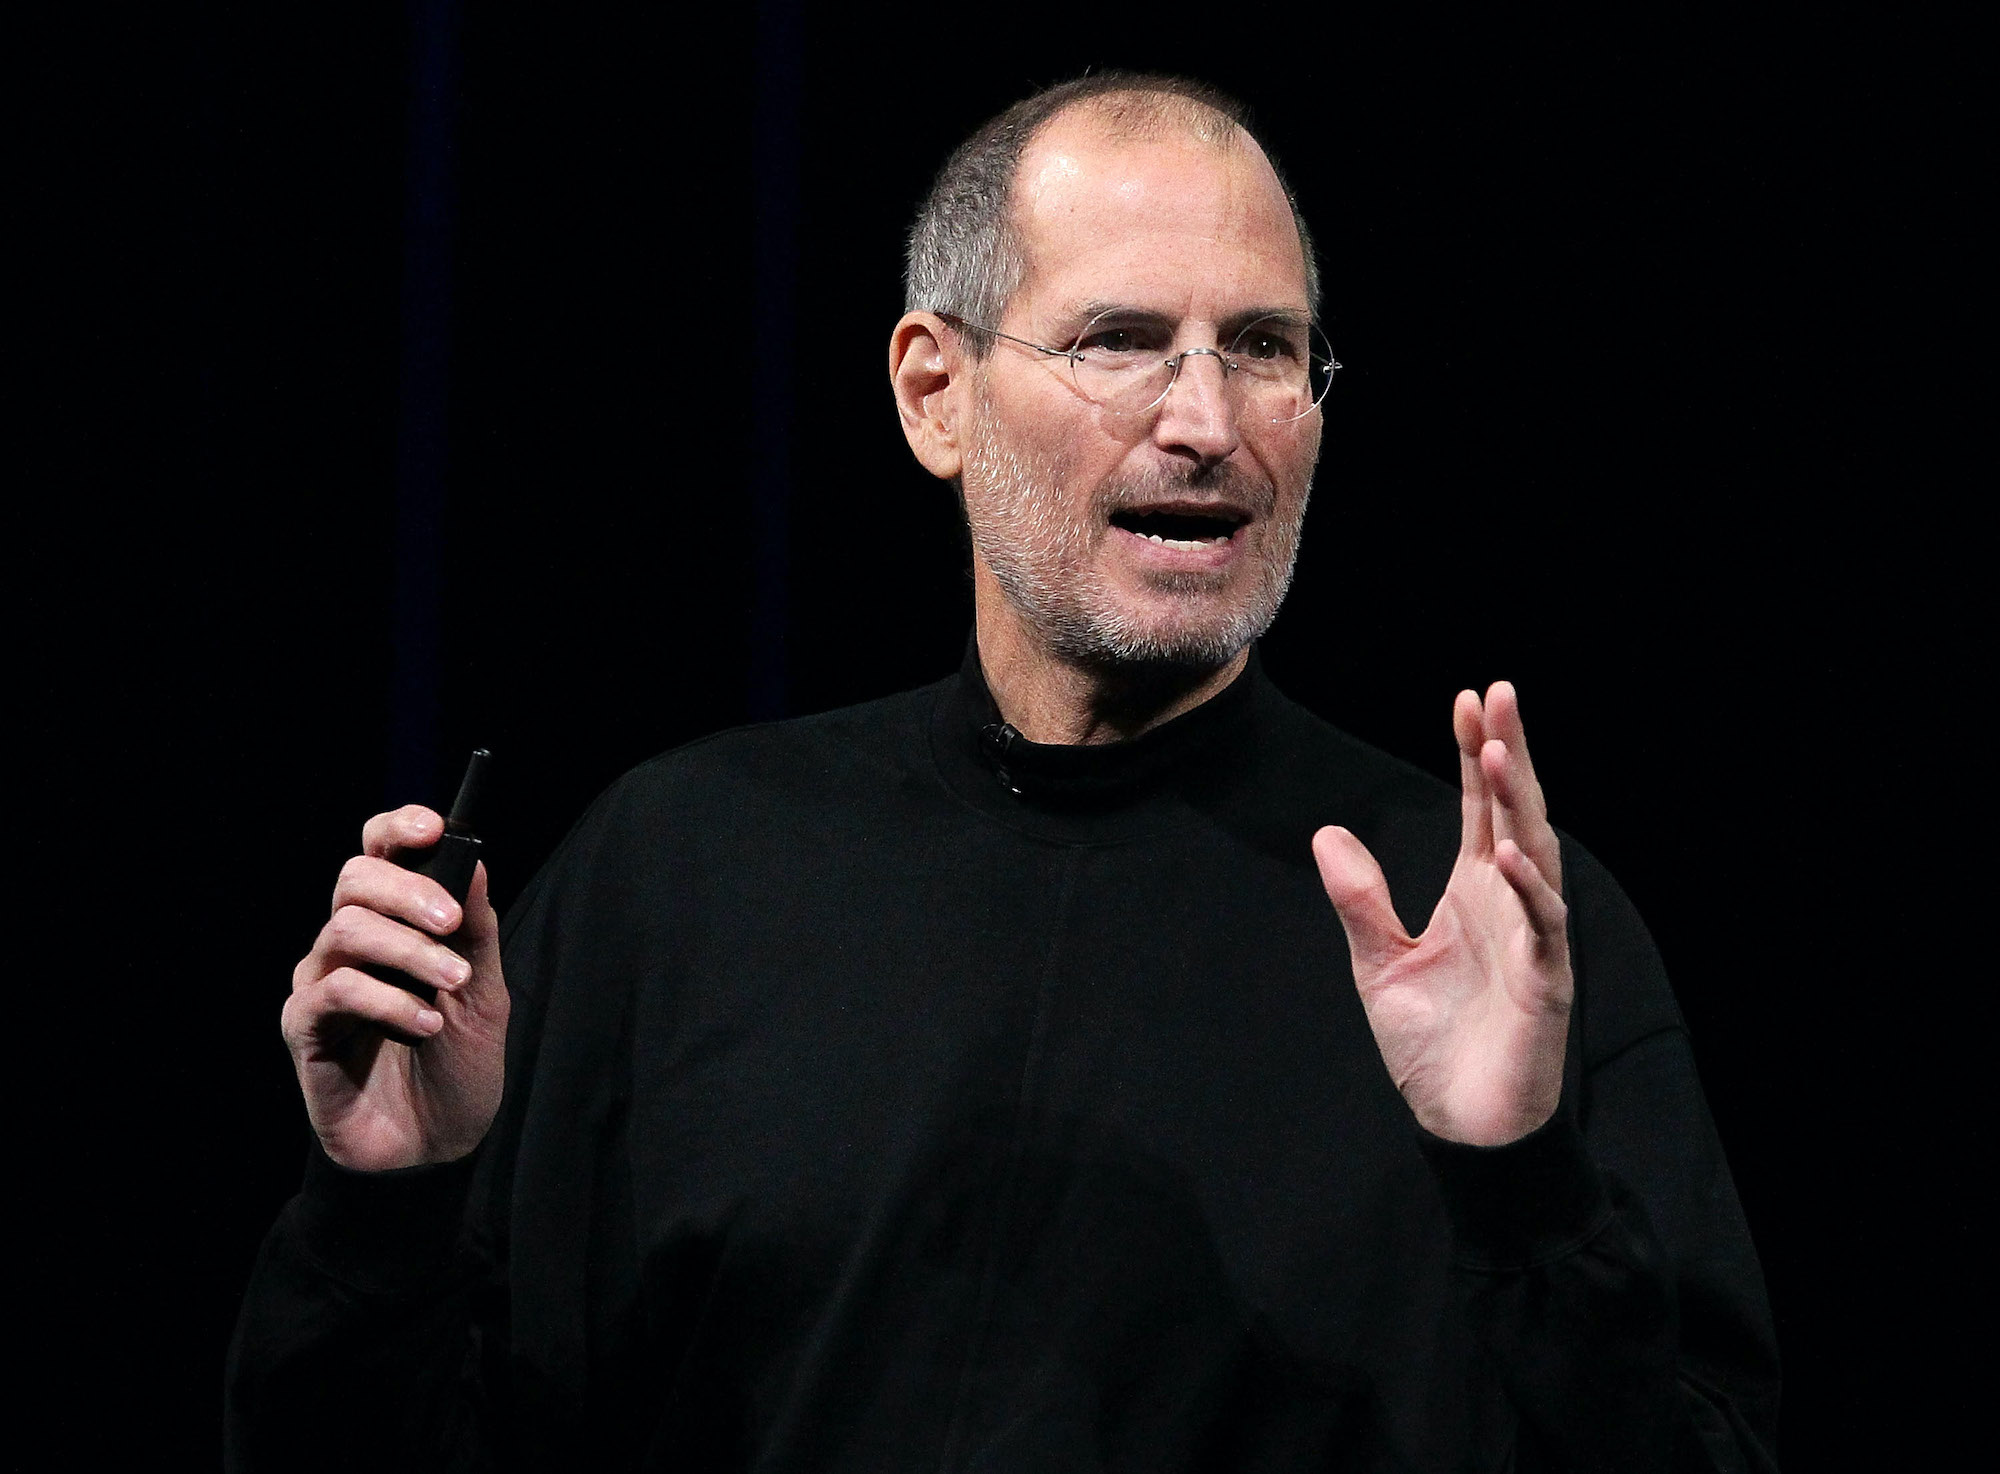 Steve Jobs speaking in front of a black background